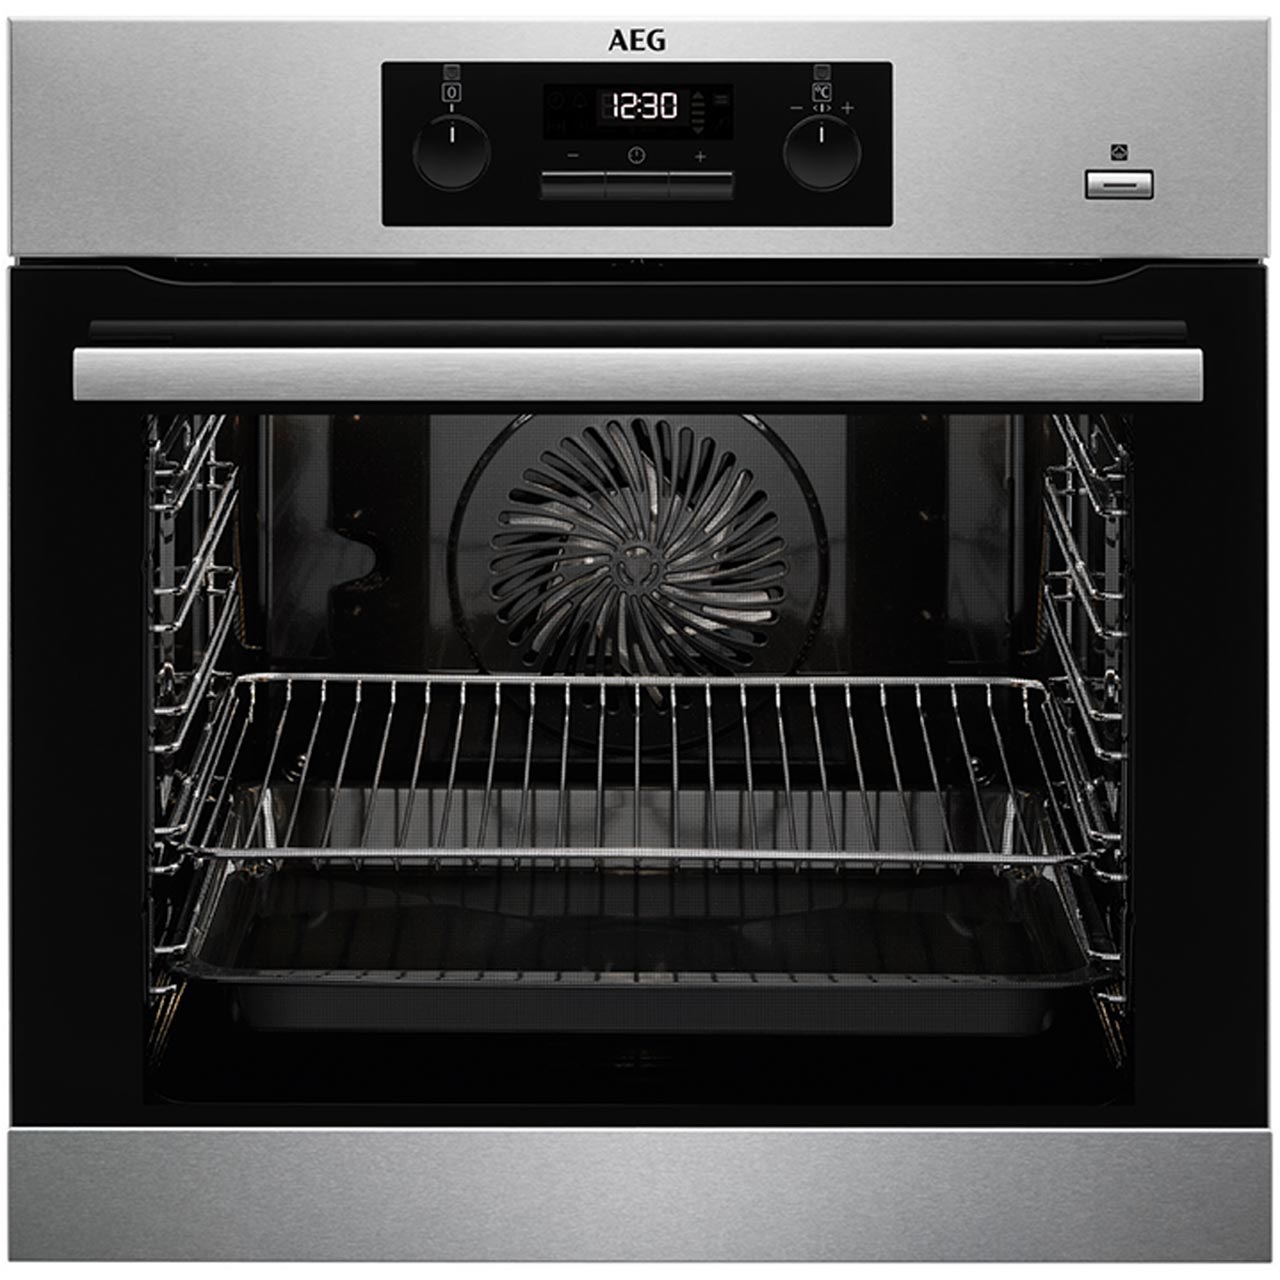 Single oven cleaned by Ultra Clean Ovens - £59